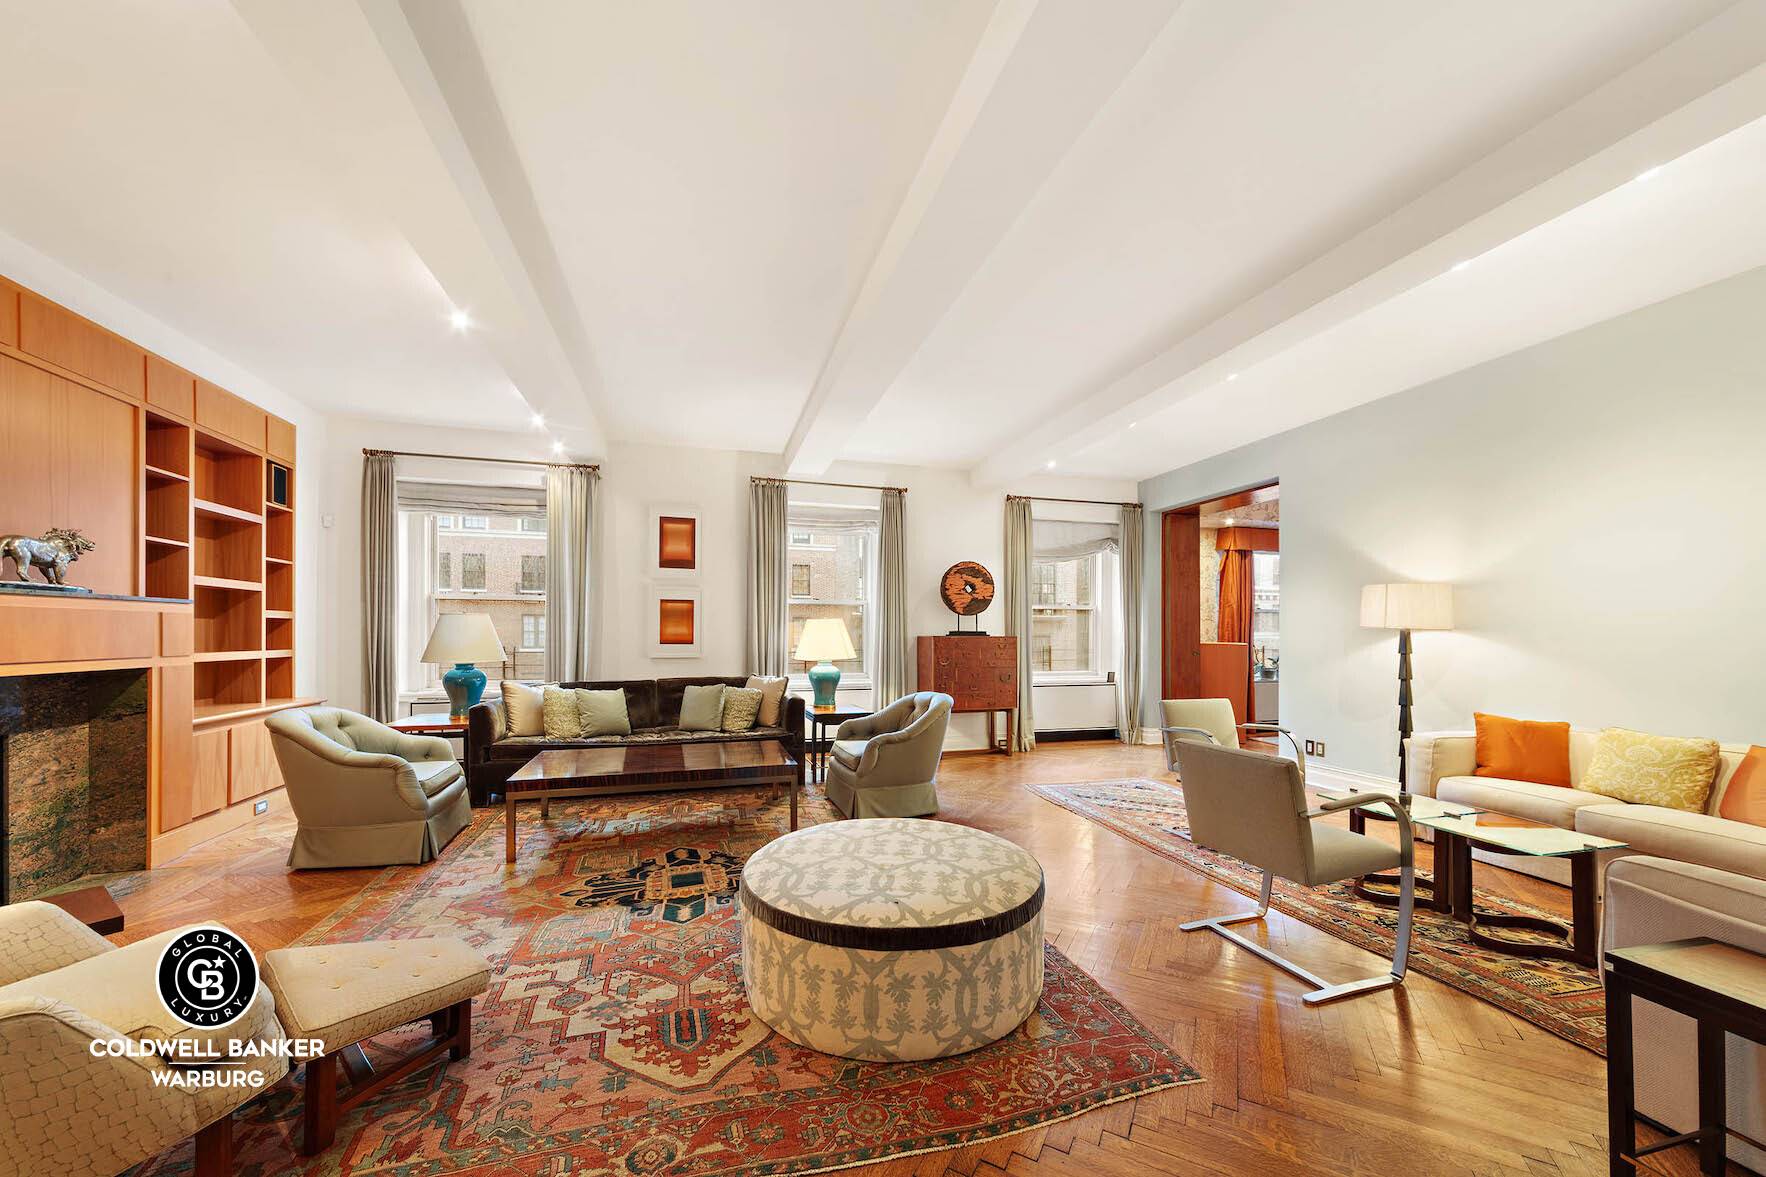 Now available for the first time in many years, this very large, very high duplex at beautiful 155 East 72nd Street will wow you.